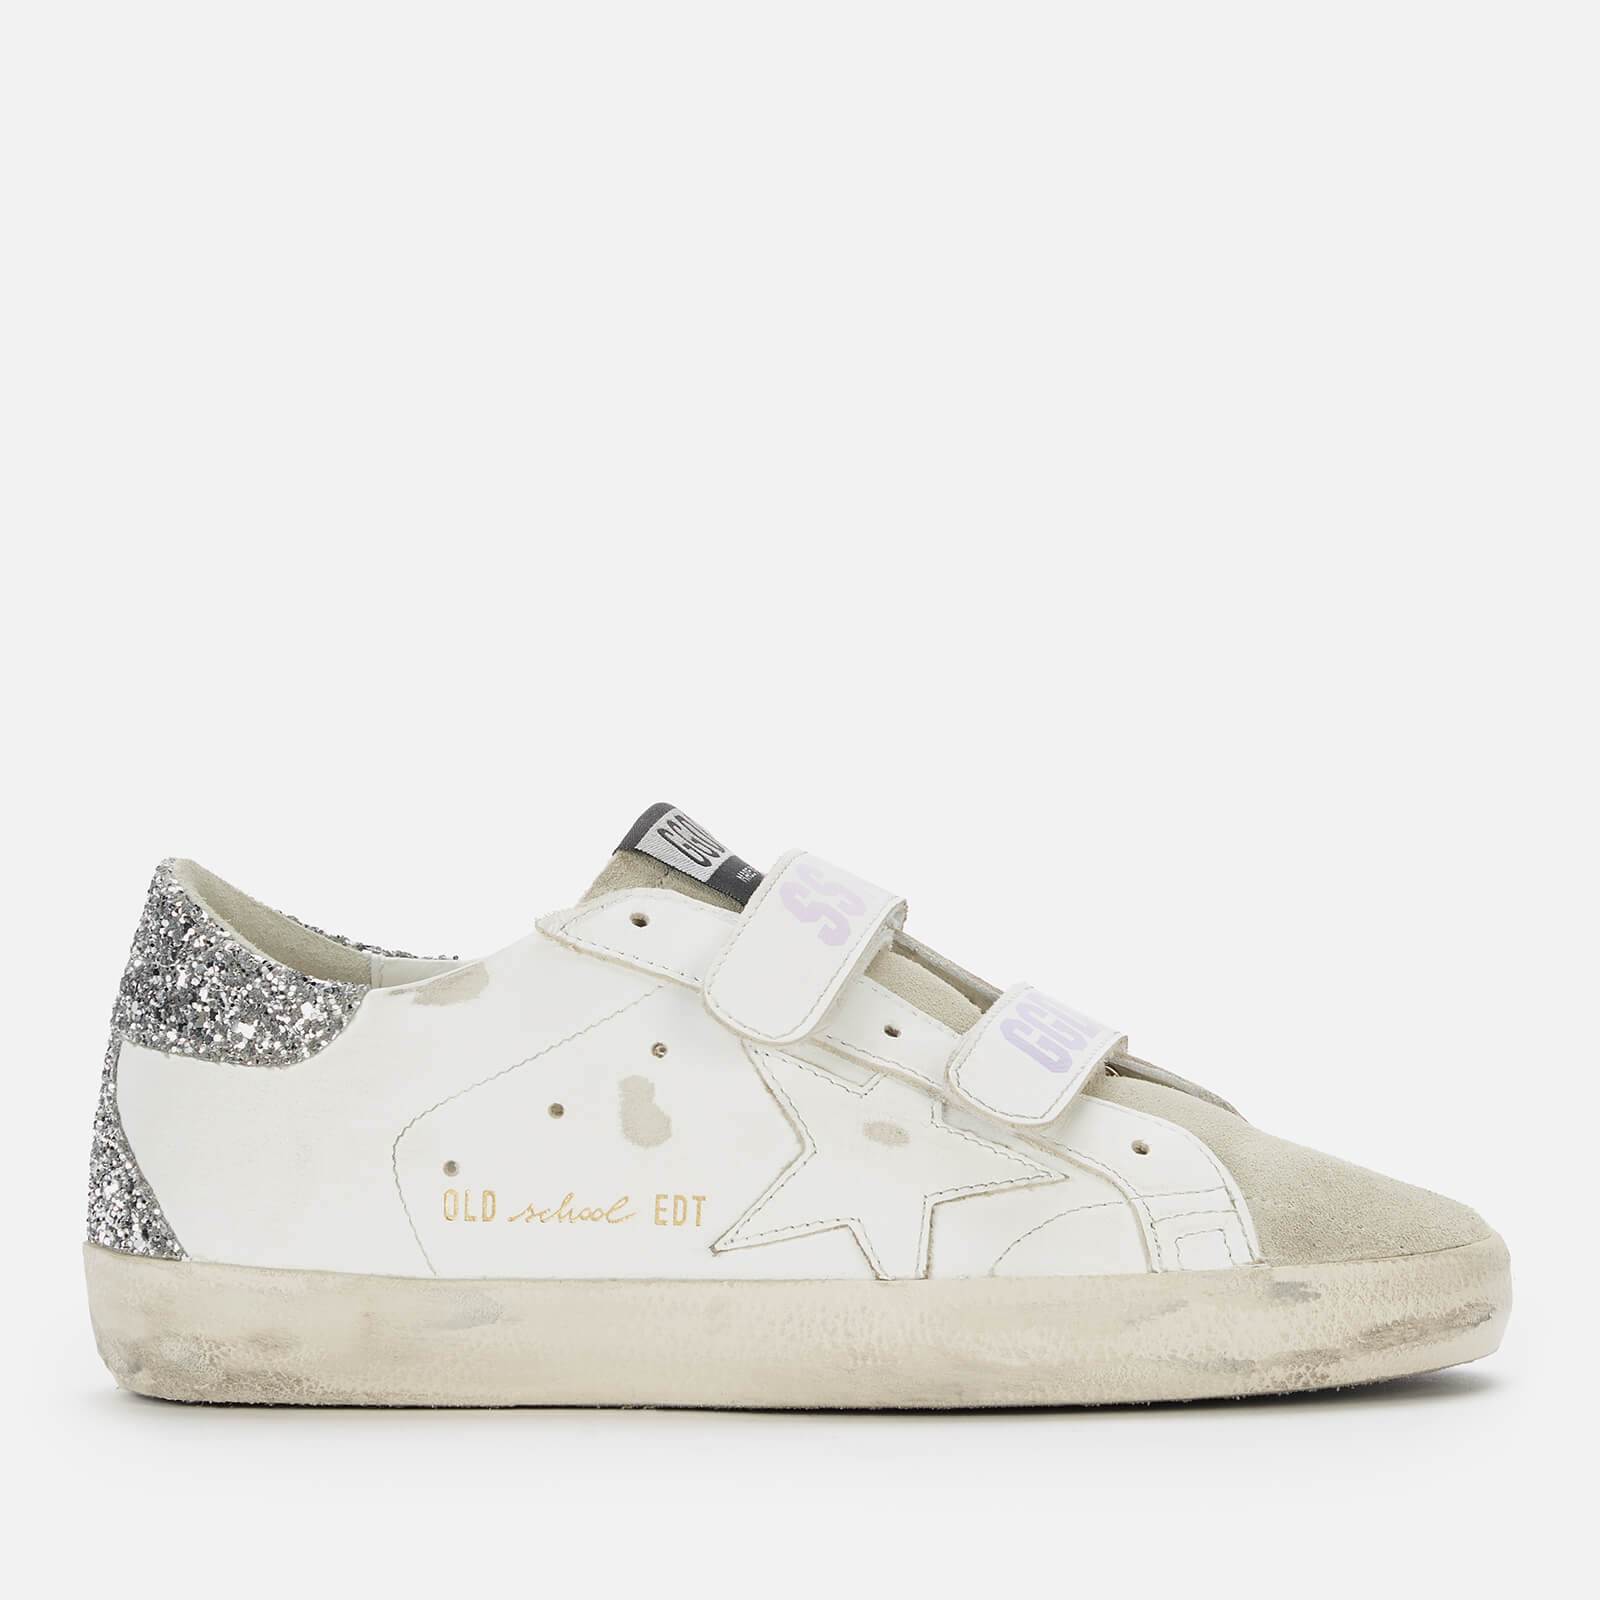 Golden Goose Deluxe Brand Women's Old School Leather Velcro Trainers - White/Ice/Silver - UK 7